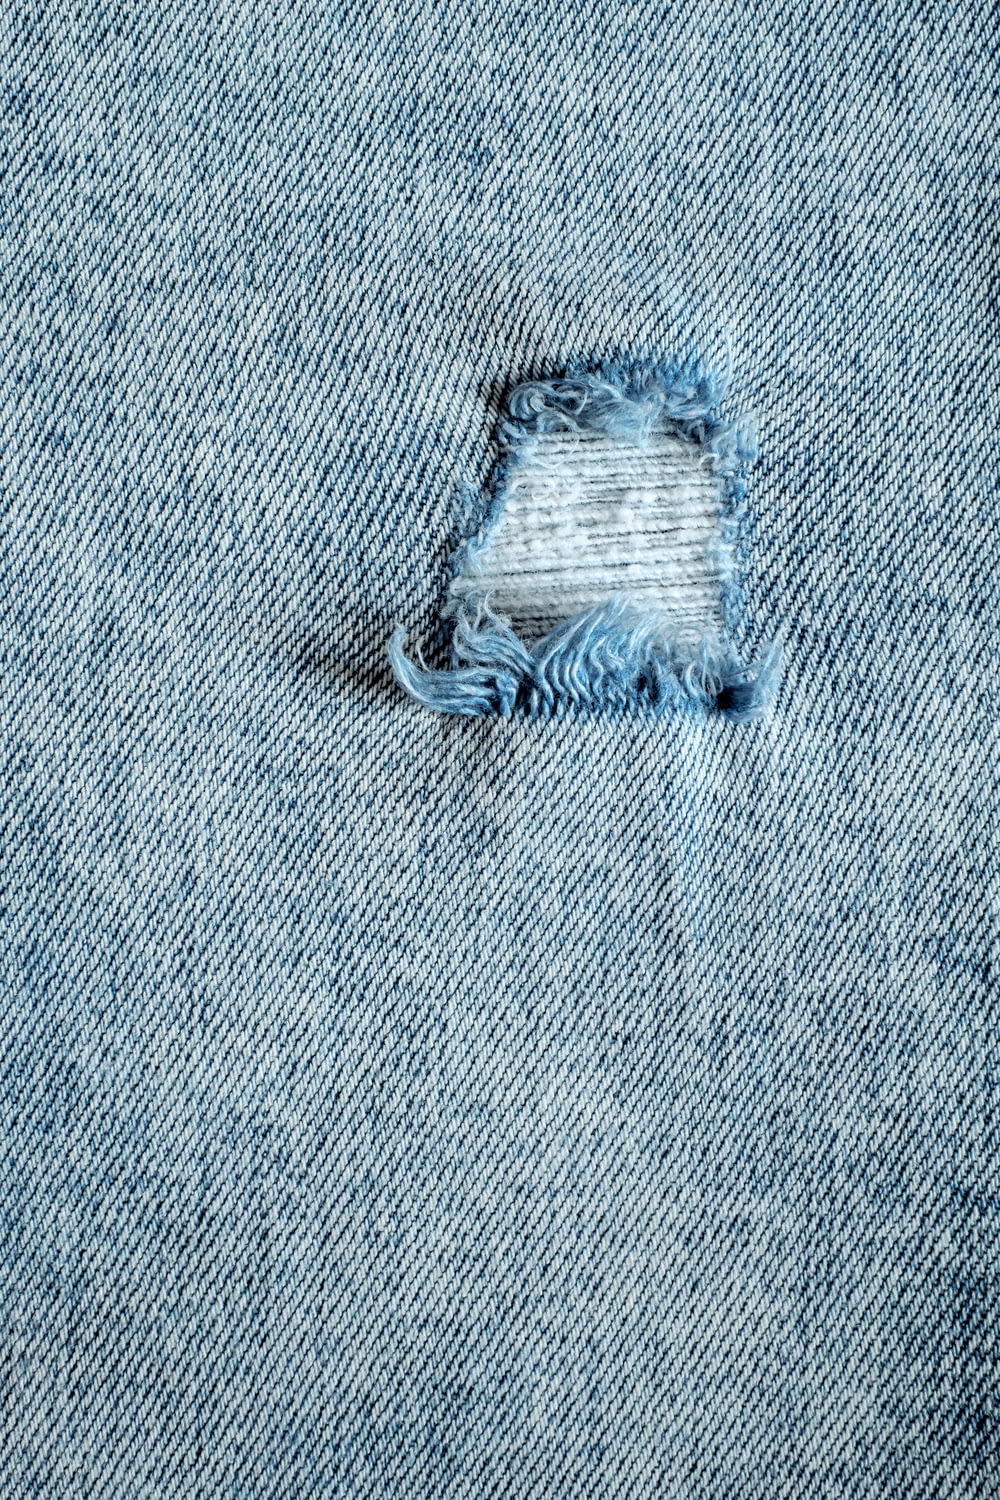 a hole in the back of a pair of jeans